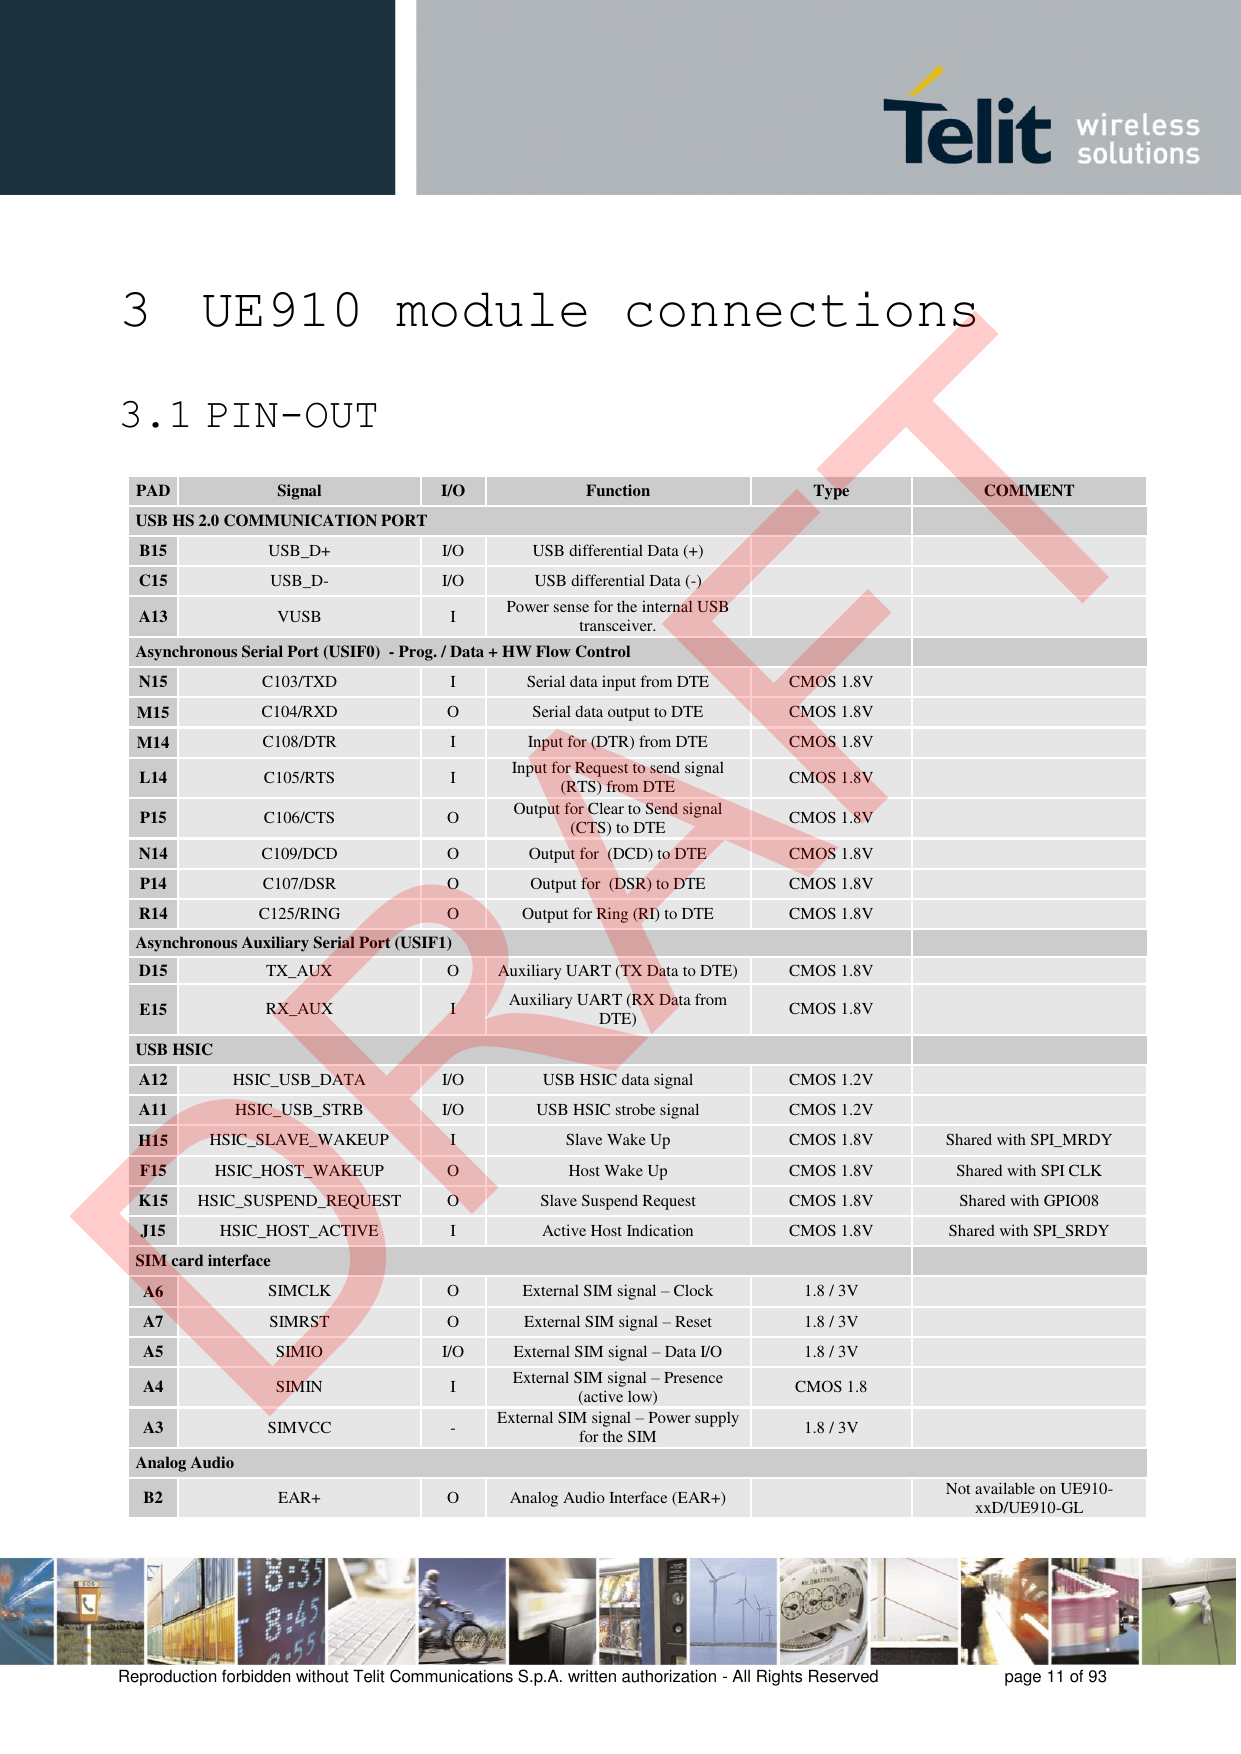 Reproduction forbidden without Telit Communications S.p.A. written authorization - All Rights Reserved  page 11 of 93 3 UE910 module connections 3.1 PIN-OUT PAD Signal I/O Function Type COMMENT USB HS 2.0 COMMUNICATION PORT B15 USB_D+ I/O USB differential Data (+) C15 USB_D- I/O USB differential Data (-) A13 VUSB I Power sense for the internal USB transceiver. Asynchronous Serial Port (USIF0)  - Prog. / Data + HW Flow Control N15 C103/TXD I Serial data input from DTE CMOS 1.8V M15 C104/RXD O Serial data output to DTE CMOS 1.8V M14 C108/DTR I Input for (DTR) from DTE CMOS 1.8V L14 C105/RTS I Input for Request to send signal (RTS) from DTE CMOS 1.8V P15 C106/CTS O Output for Clear to Send signal (CTS) to DTECMOS 1.8V N14 C109/DCD O Output for  (DCD) to DTE CMOS 1.8V P14 C107/DSR O Output for  (DSR) to DTE CMOS 1.8V R14 C125/RING O Output for Ring (RI) to DTE CMOS 1.8V Asynchronous Auxiliary Serial Port (USIF1) D15 TX_AUX O Auxiliary UART (TX Data to DTE) CMOS 1.8V E15 RX_AUX I Auxiliary UART (RX Data from DTE) CMOS 1.8V USB HSIC A12 HSIC_USB_DATA I/O USB HSIC data signal CMOS 1.2V A11 HSIC_USB_STRB I/O USB HSIC strobe signal CMOS 1.2V H15 HSIC_SLAVE_WAKEUP I Slave Wake Up CMOS 1.8V Shared with SPI_MRDY F15 HSIC_HOST_WAKEUP O Host Wake Up CMOS 1.8V Shared with SPI CLK K15 HSIC_SUSPEND_REQUEST O Slave Suspend Request CMOS 1.8V Shared with GPIO08 J15 HSIC_HOST_ACTIVE I Active Host Indication CMOS 1.8V Shared with SPI_SRDY SIM card interface A6 SIMCLK O External SIM signal – Clock 1.8 / 3V A7 SIMRST O External SIM signal – Reset 1.8 / 3V A5 SIMIO I/O External SIM signal – Data I/O 1.8 / 3V A4 SIMIN I External SIM signal – Presence (active low) CMOS 1.8 A3 SIMVCC - External SIM signal – Power supply for the SIM 1.8 / 3V Analog Audio  B2 EAR+ O Analog Audio Interface (EAR+) Not available on UE910-xxD/UE910-GL DRAFT